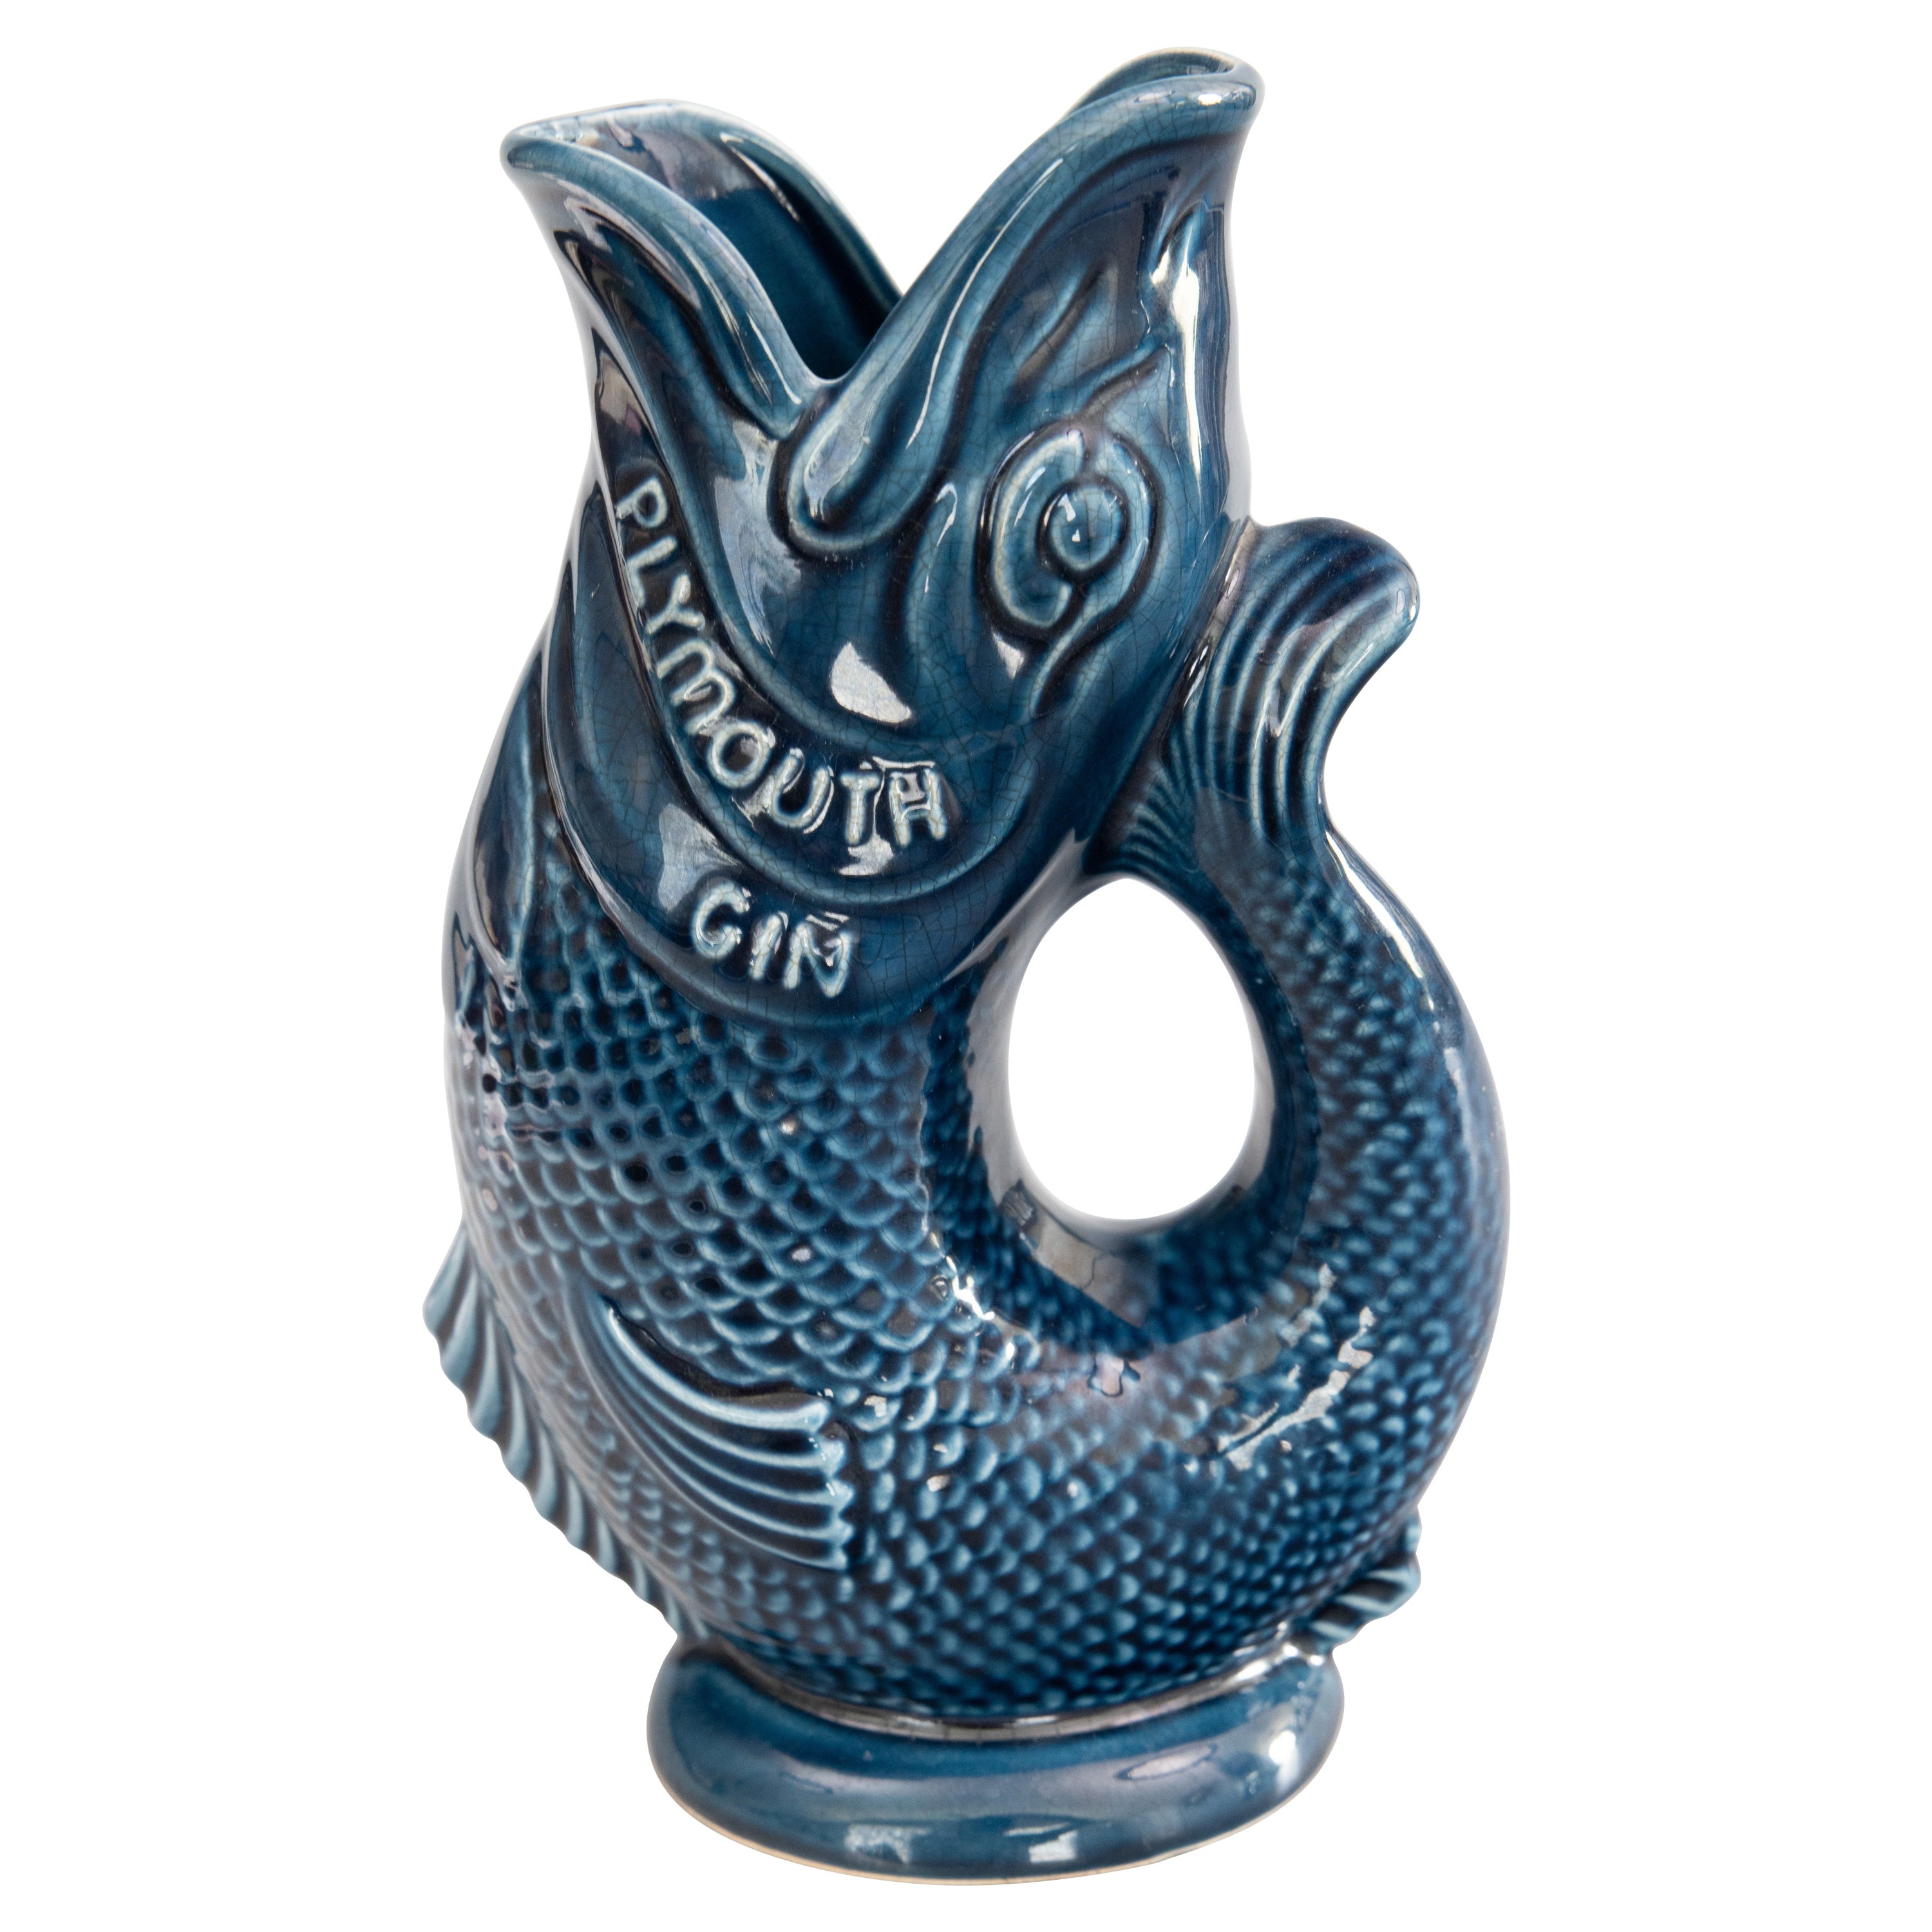 Mid-20th Century English Majolica Blue Gurgling Fish "Plymouth Gin" Pitcher Jug For Sale